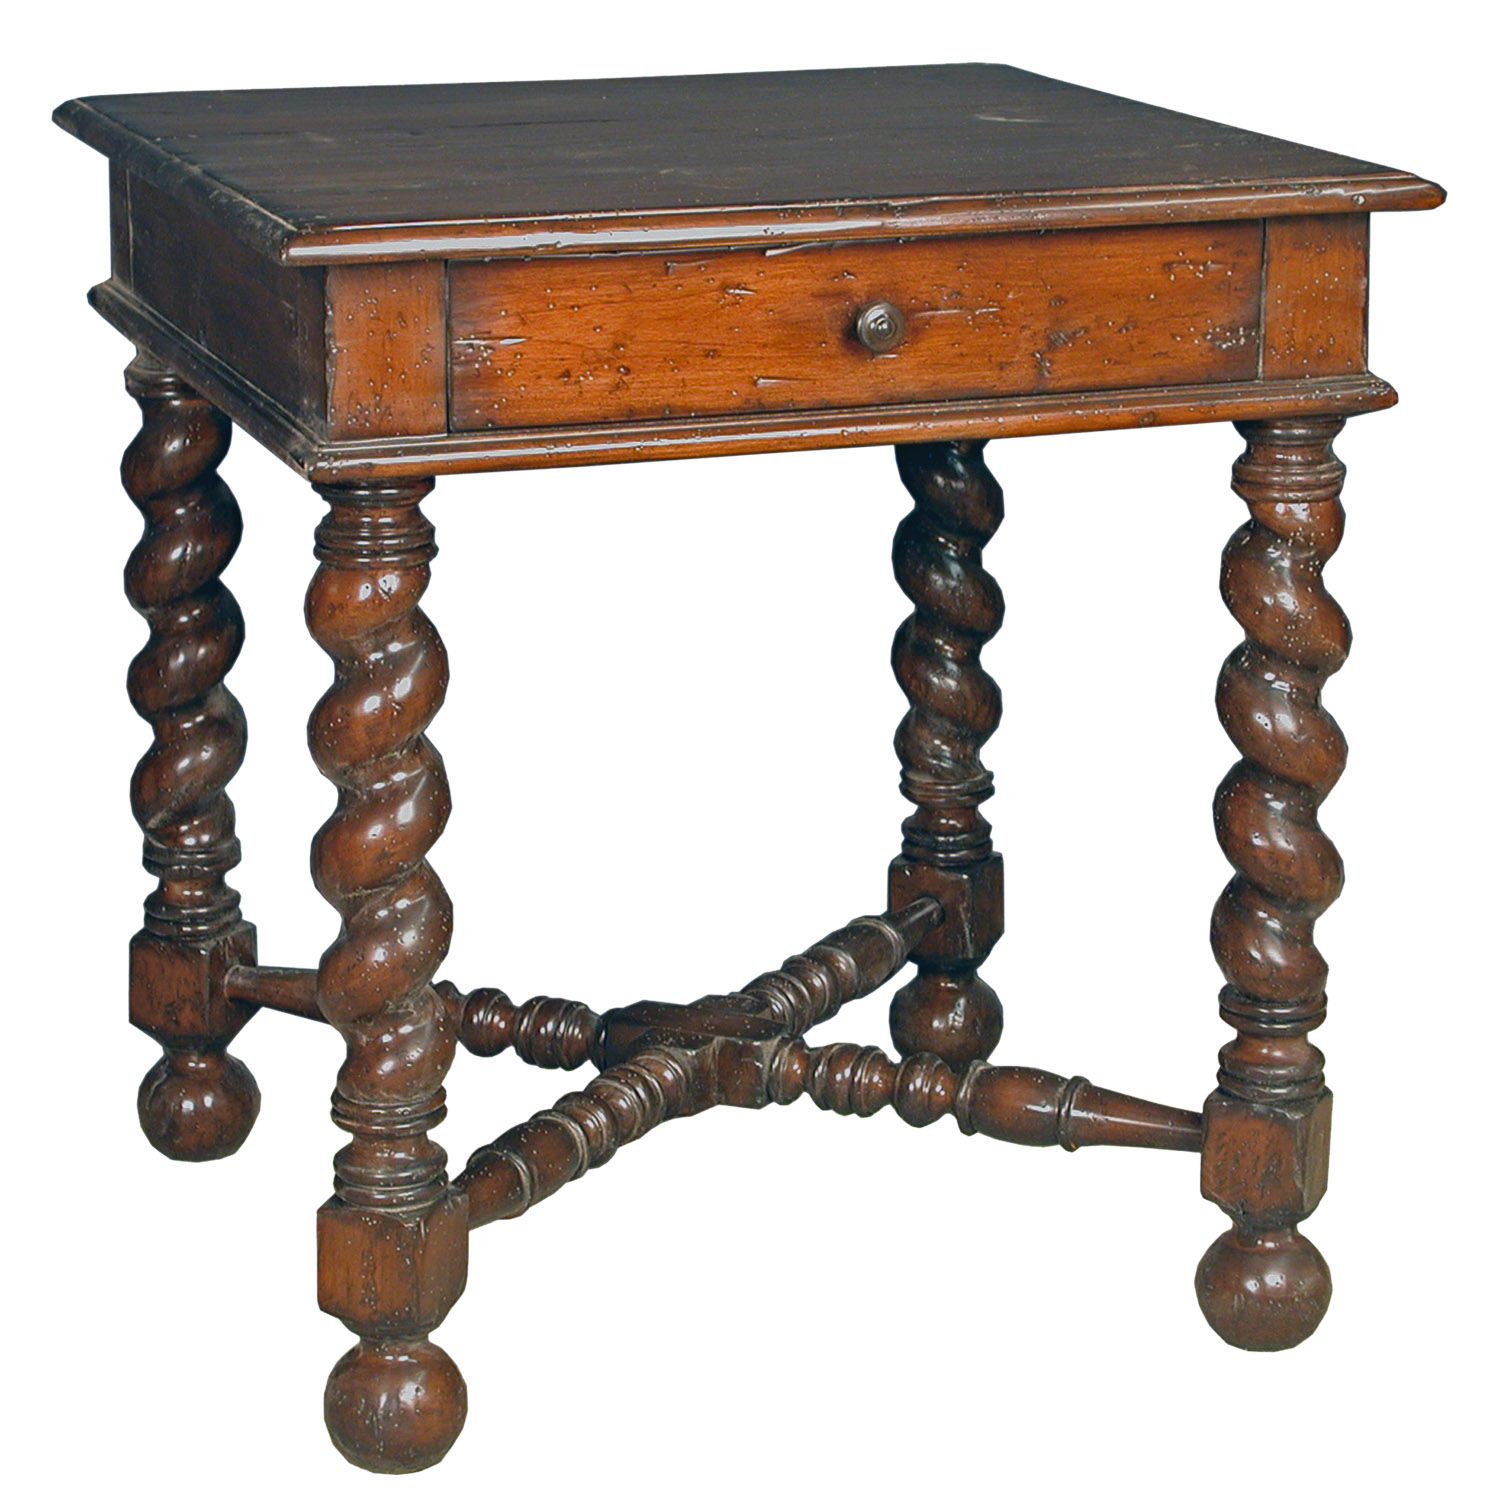 Otto traditional spindle twist leg side end table by Woodland furniture in Idaho Falls USA